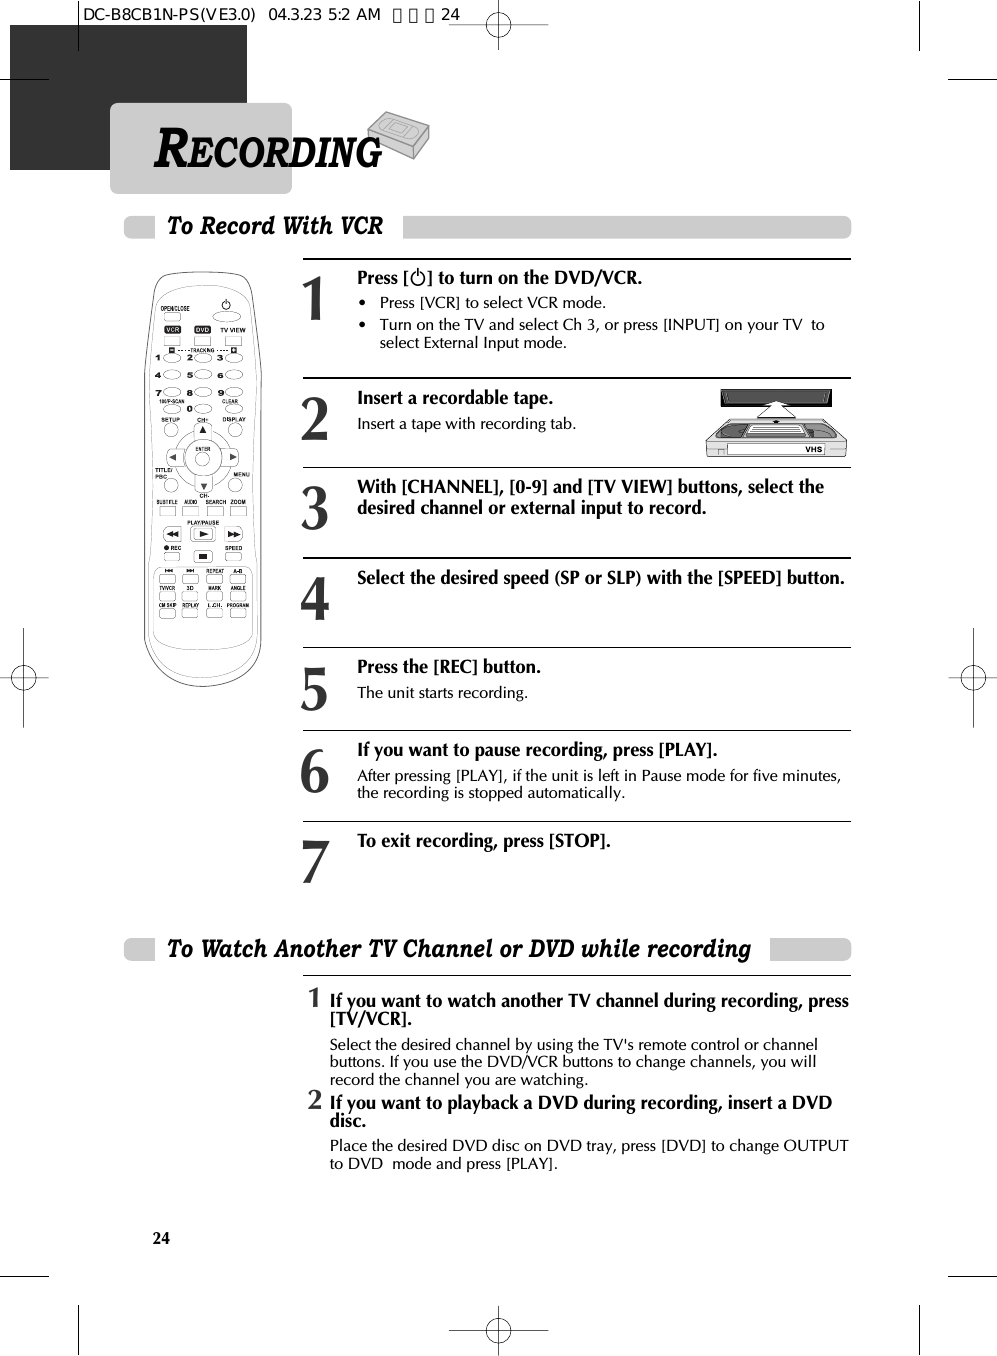 24To Watch Another TV Channel or DVD while recording1If you want to watch another TV channel during recording, press[TV/VCR].Select the desired channel by using the TV&apos;s remote control or channelbuttons. If you use the DVD/VCR buttons to change channels, you willrecord the channel you are watching.2If you want to playback a DVD during recording, insert a DVDdisc.Place the desired DVD disc on DVD tray, press [DVD] to change OUTPUTto DVD  mode and press [PLAY].RECORDINGPress [√] to turn on the DVD/VCR.• Press [VCR] to select VCR mode. • Turn on the TV and select Ch 3, or press [INPUT] on your TV  toselect External Input mode. Insert a recordable tape.Insert a tape with recording tab. With [CHANNEL], [0-9] and [TV VIEW] buttons, select thedesired channel or external input to record. 123To Record With VCRSelect the desired speed (SP or SLP) with the [SPEED] button. 4Press the [REC] button.The unit starts recording.  5If you want to pause recording, press [PLAY].After pressing [PLAY], if the unit is left in Pause mode for five minutes,the recording is stopped automatically.6To exit recording, press [STOP]. 7DC-B8CB1N-PS(VE3.0)  04.3.23 5:2 AM  페이지24